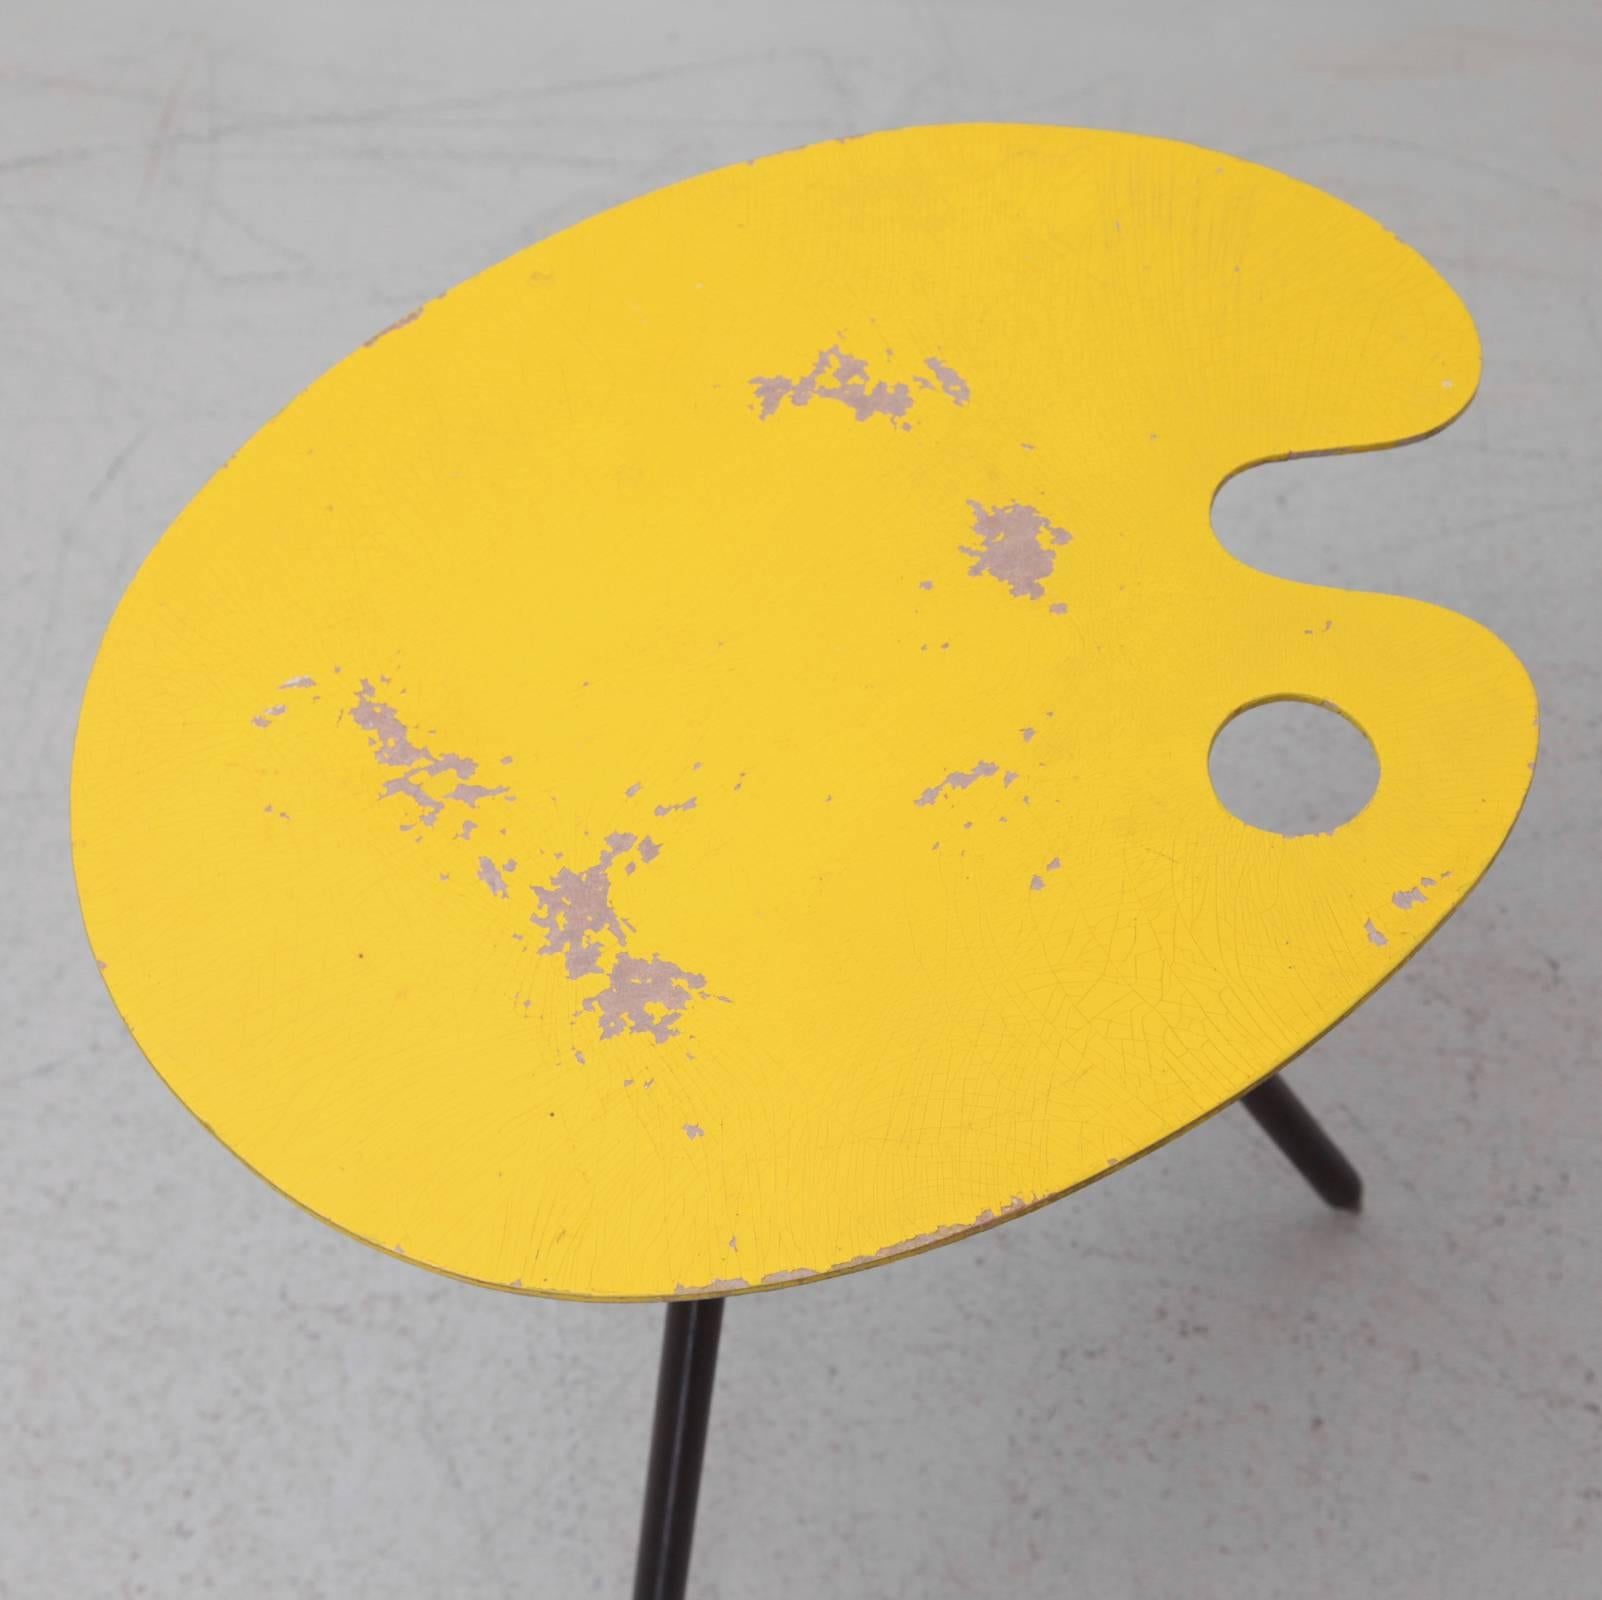 Palette table designed by Lucien De Roeck and manufactured for Bois Manu, Belgium, 1958. Designed by for the World Expo in Brussels in Belgium in 1958. The table is signed and the yellow top shows strong patina. Original vintage condition.

